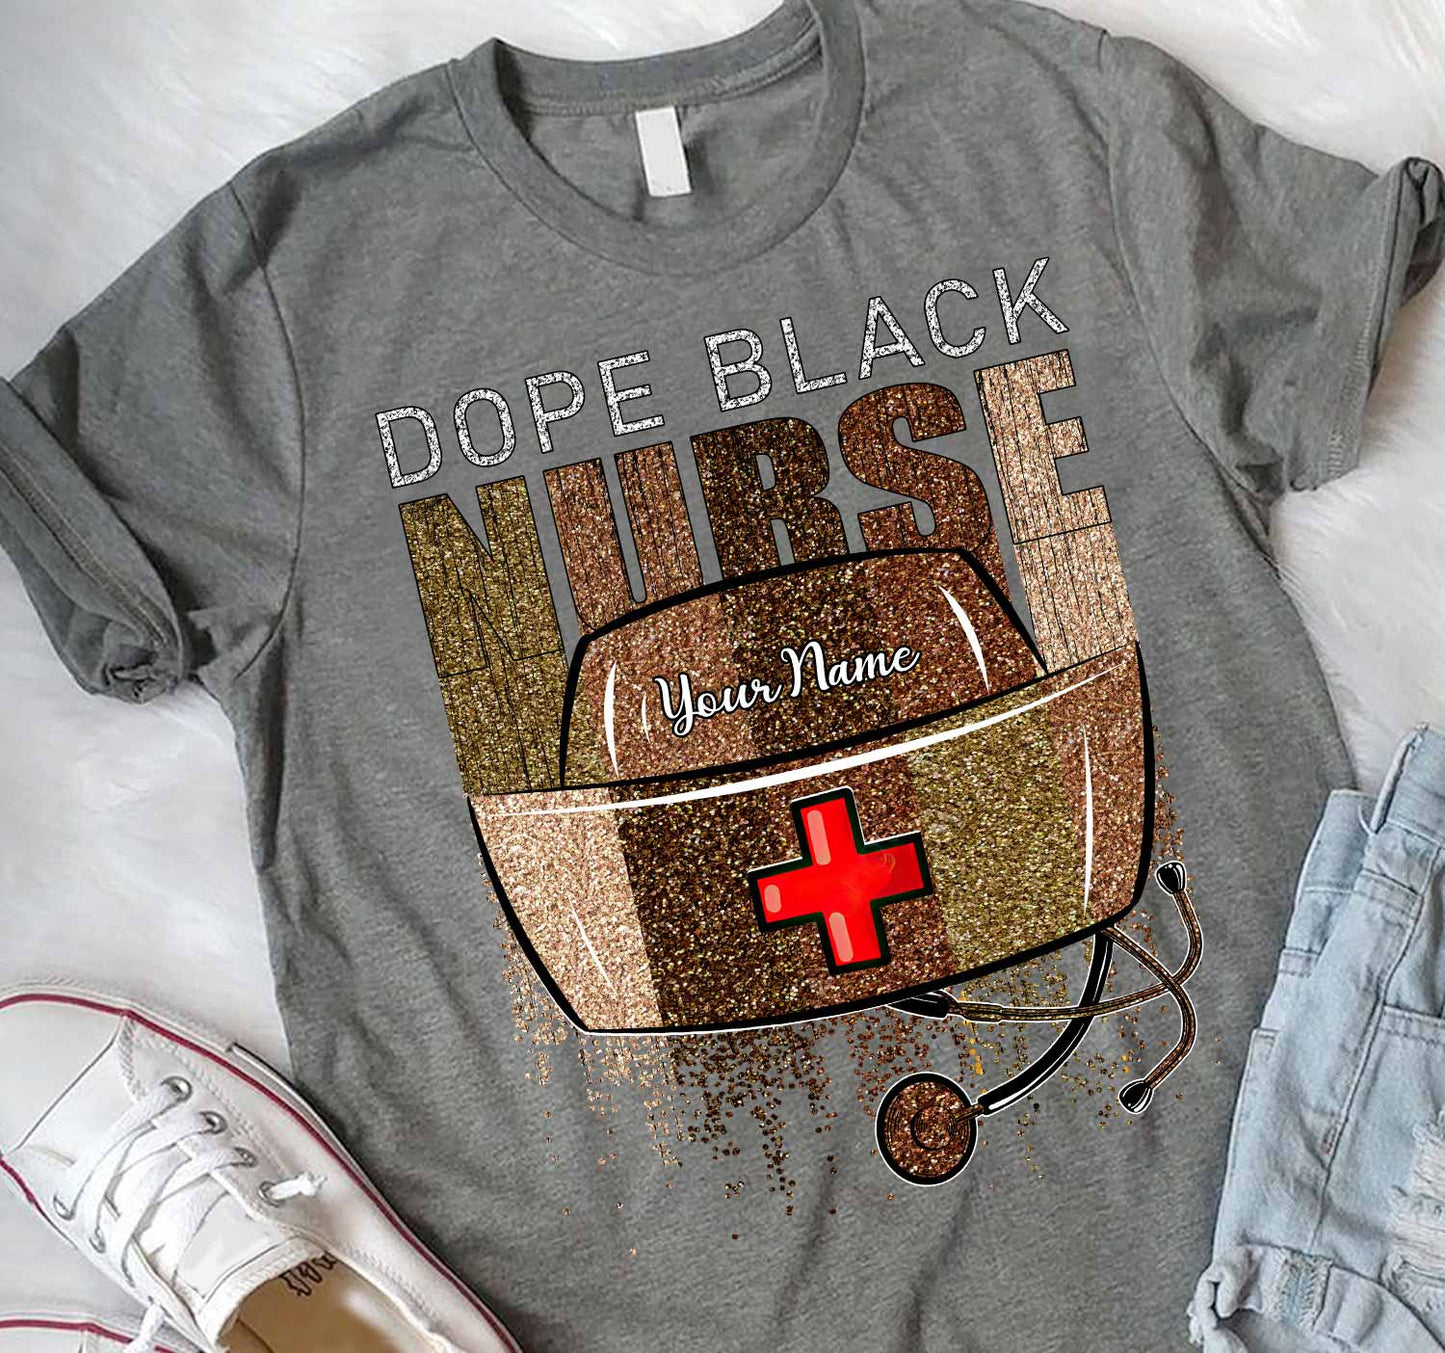 Dope Black Nurse - Personalized T-shirt and Hoodie With Faux Glitter Pattern Print